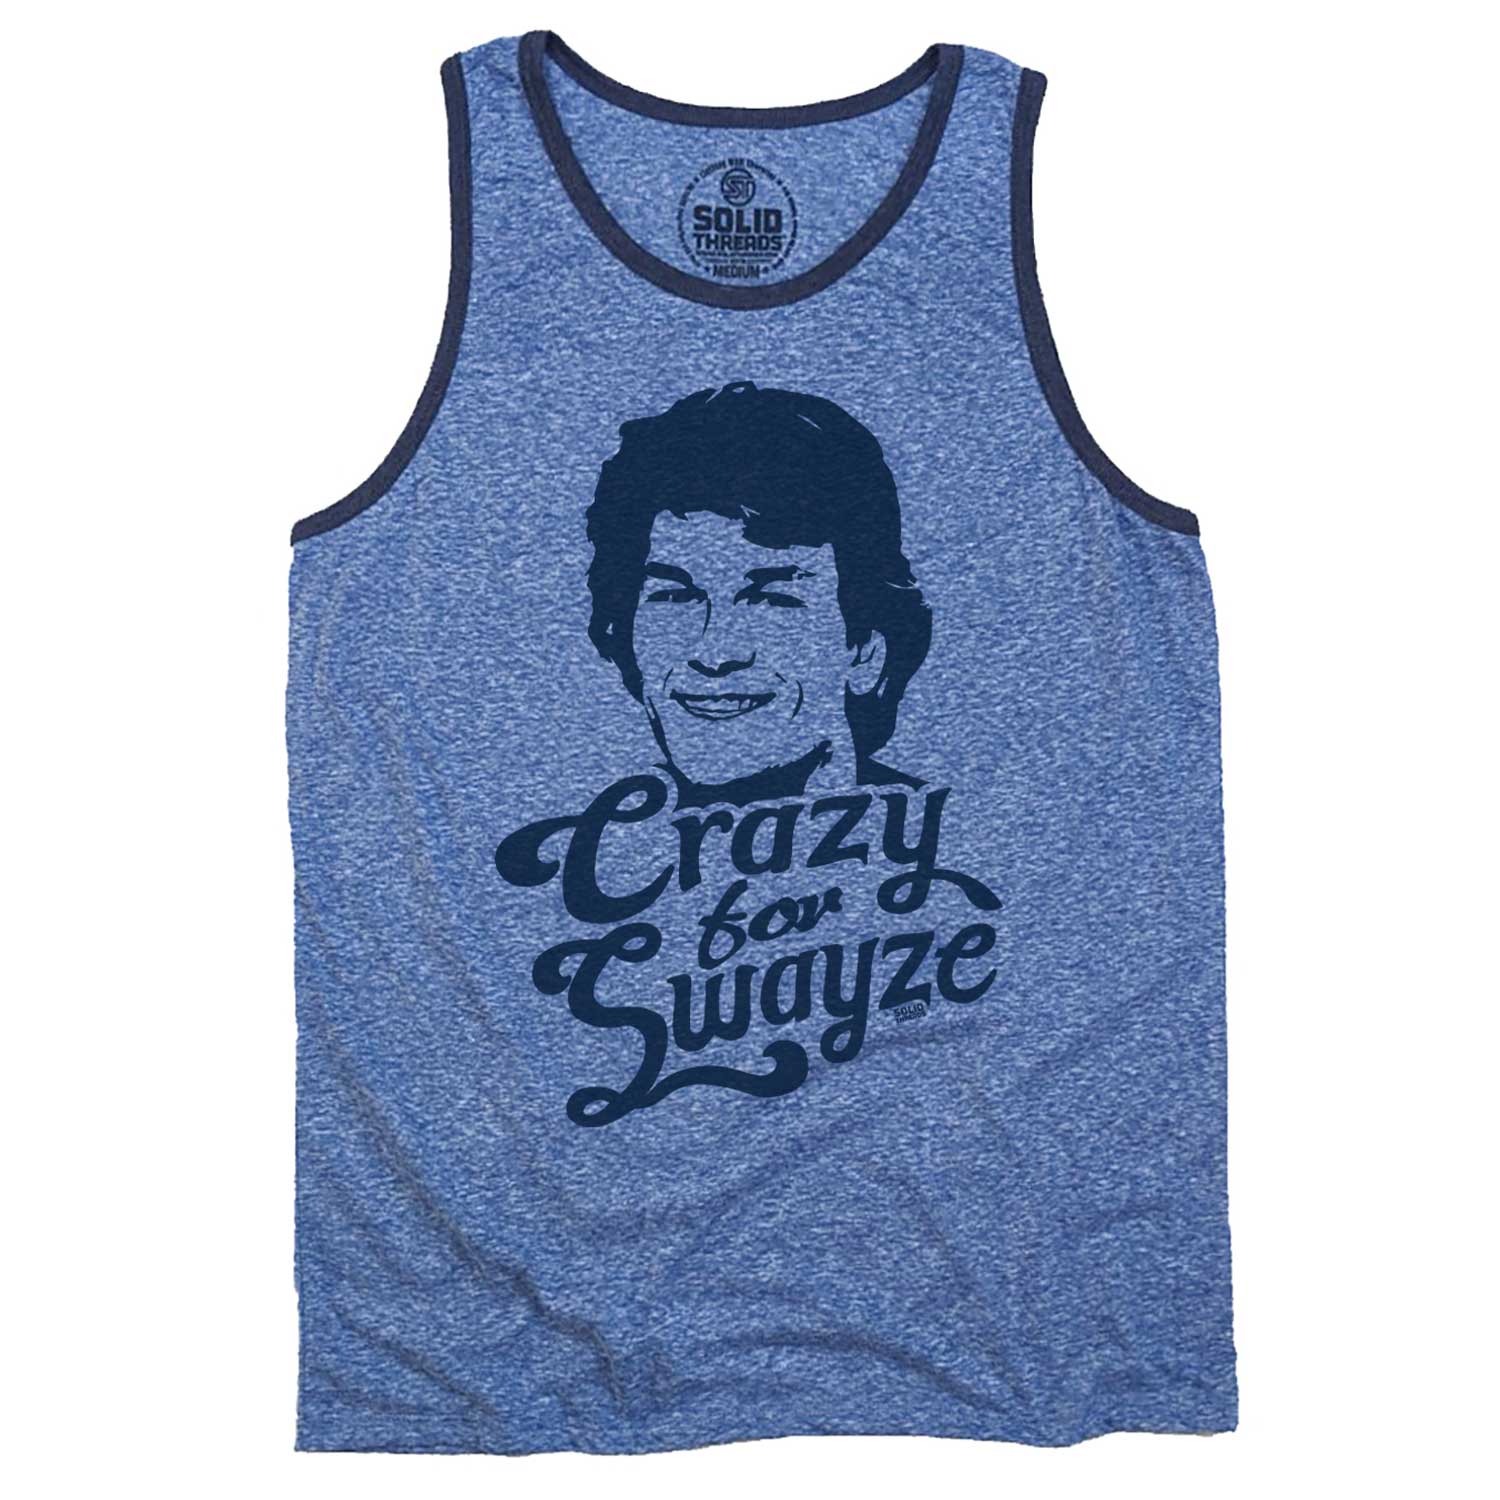 Men's Crazy for Swayze Vintage Graphic Tank Top | Funny Patrick Swayze T-shirt | Solid Threads